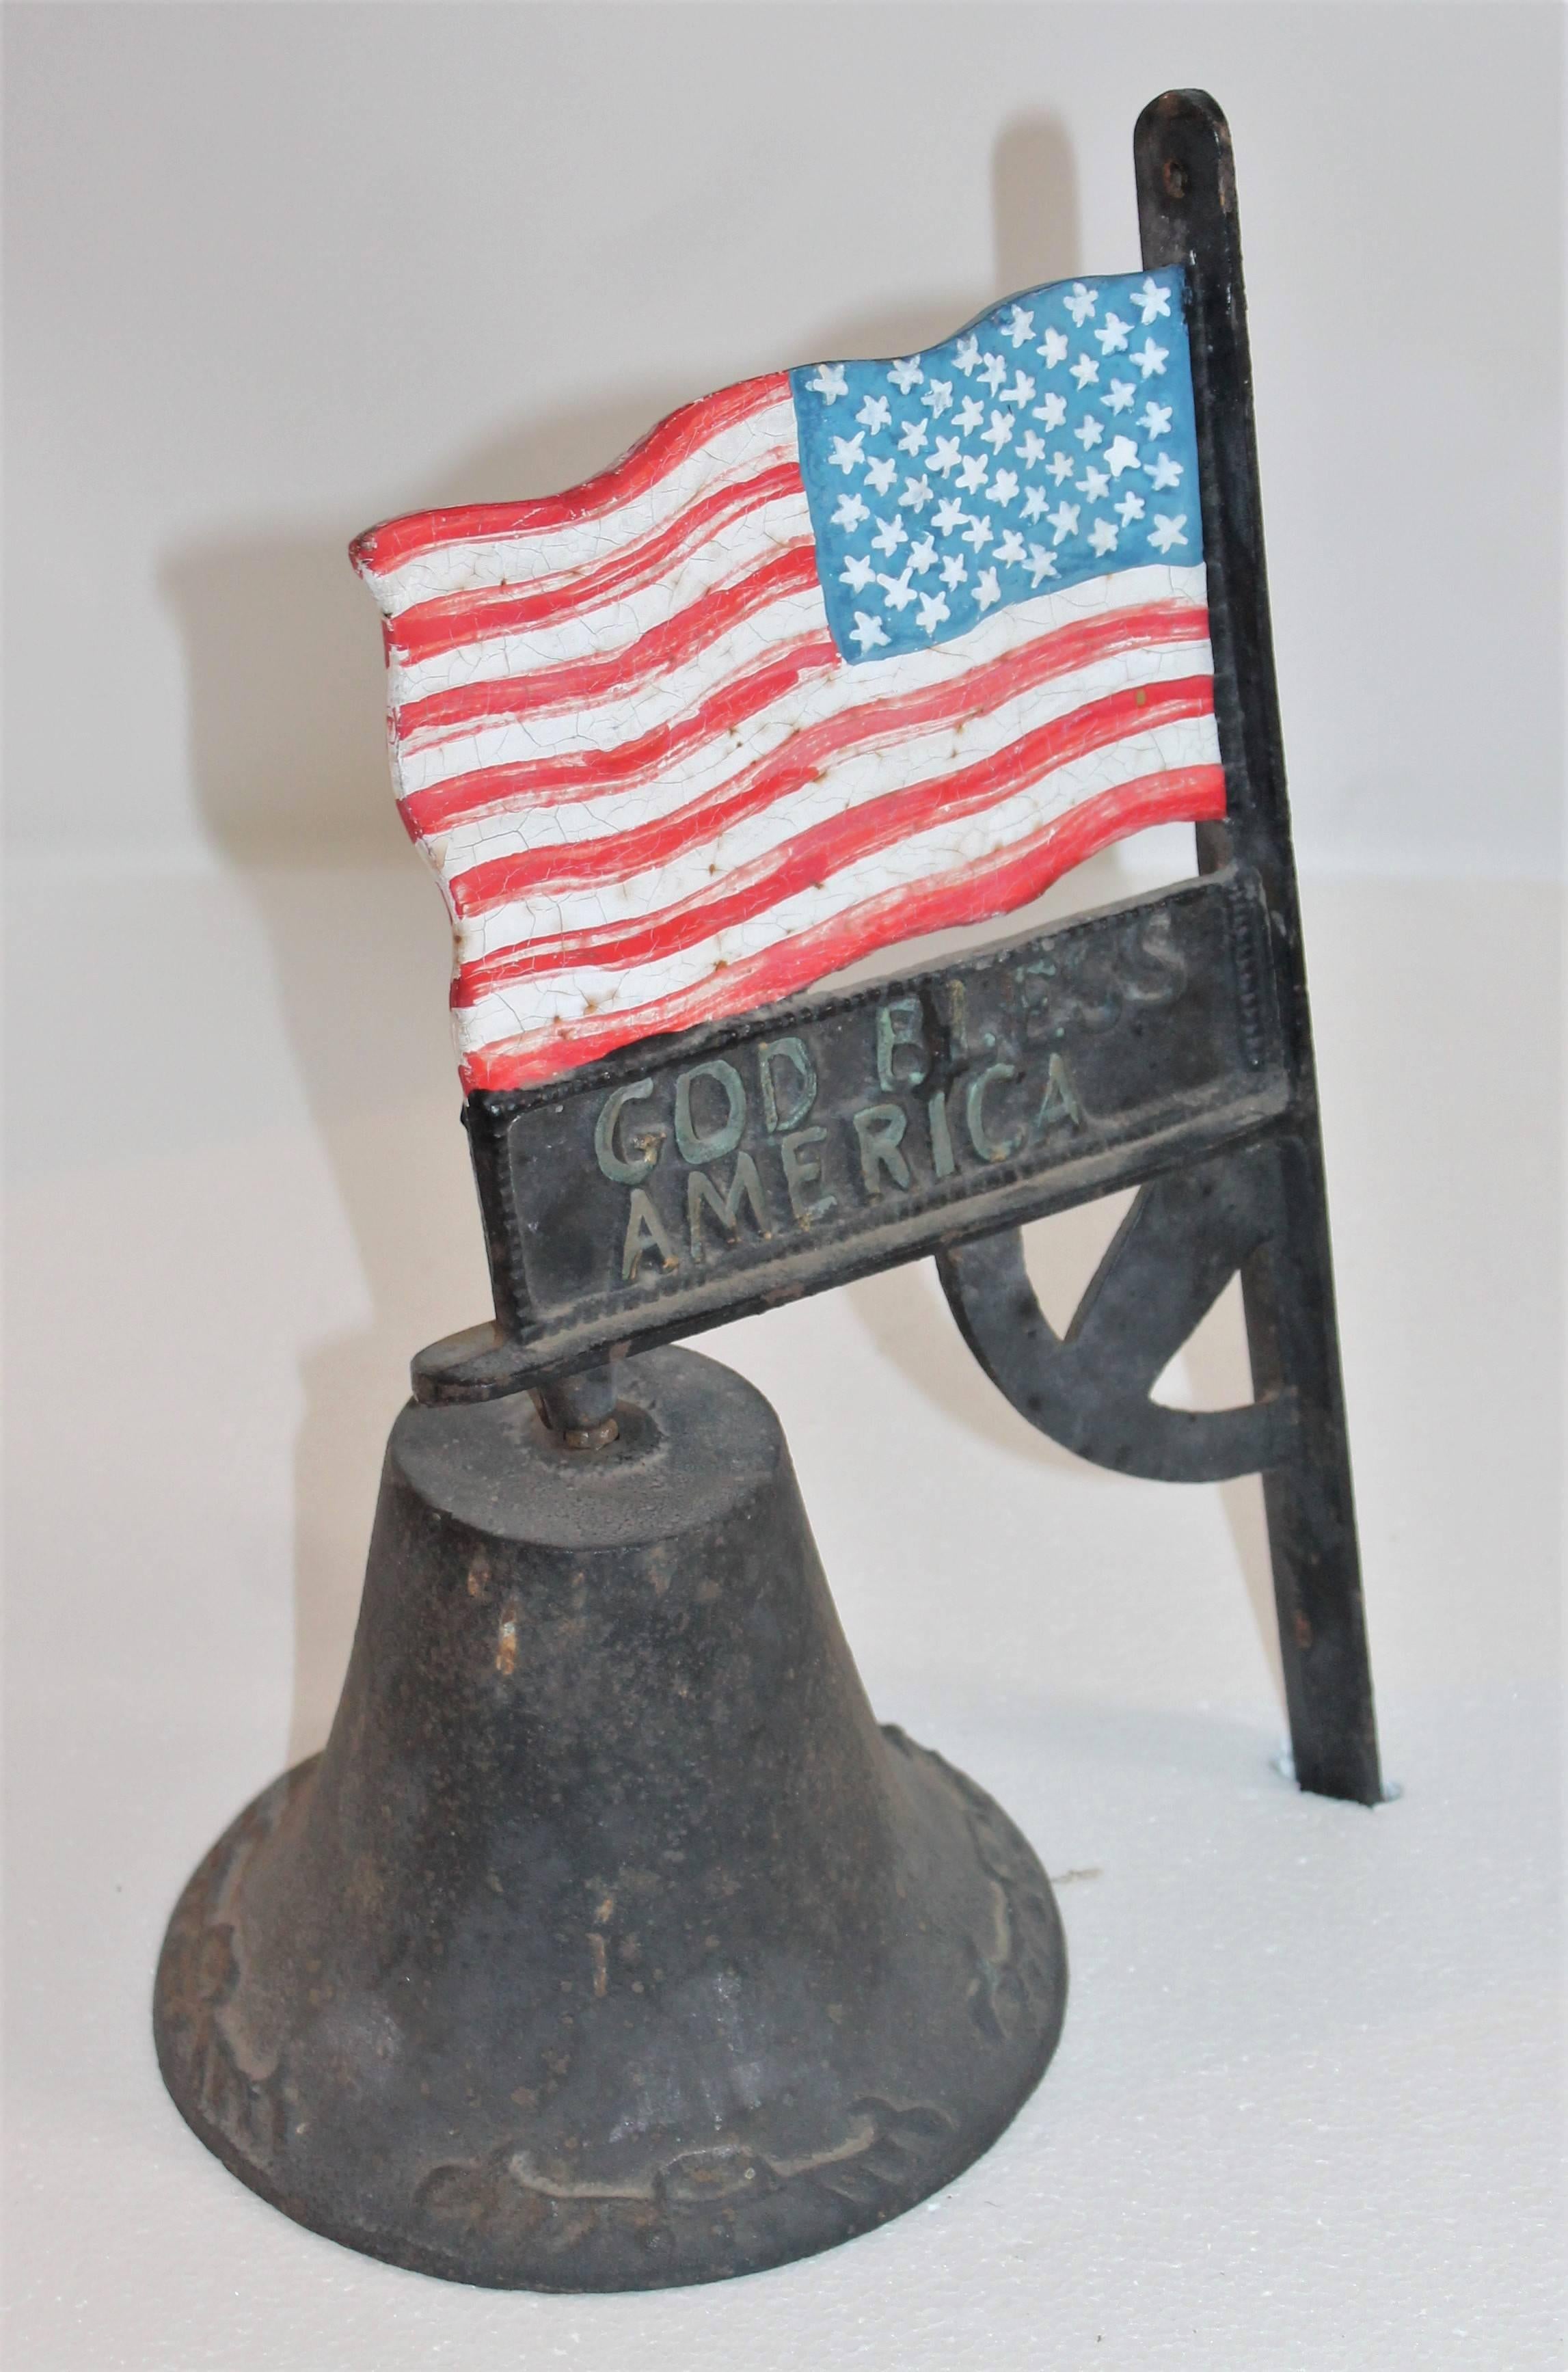 This interesting all original black painted wall-mounted bell and American flag is in good condition and in working order. The flag is faded on one side due to the bad weather or sun fade. Was hung outside of the home. Probably front porch or entry